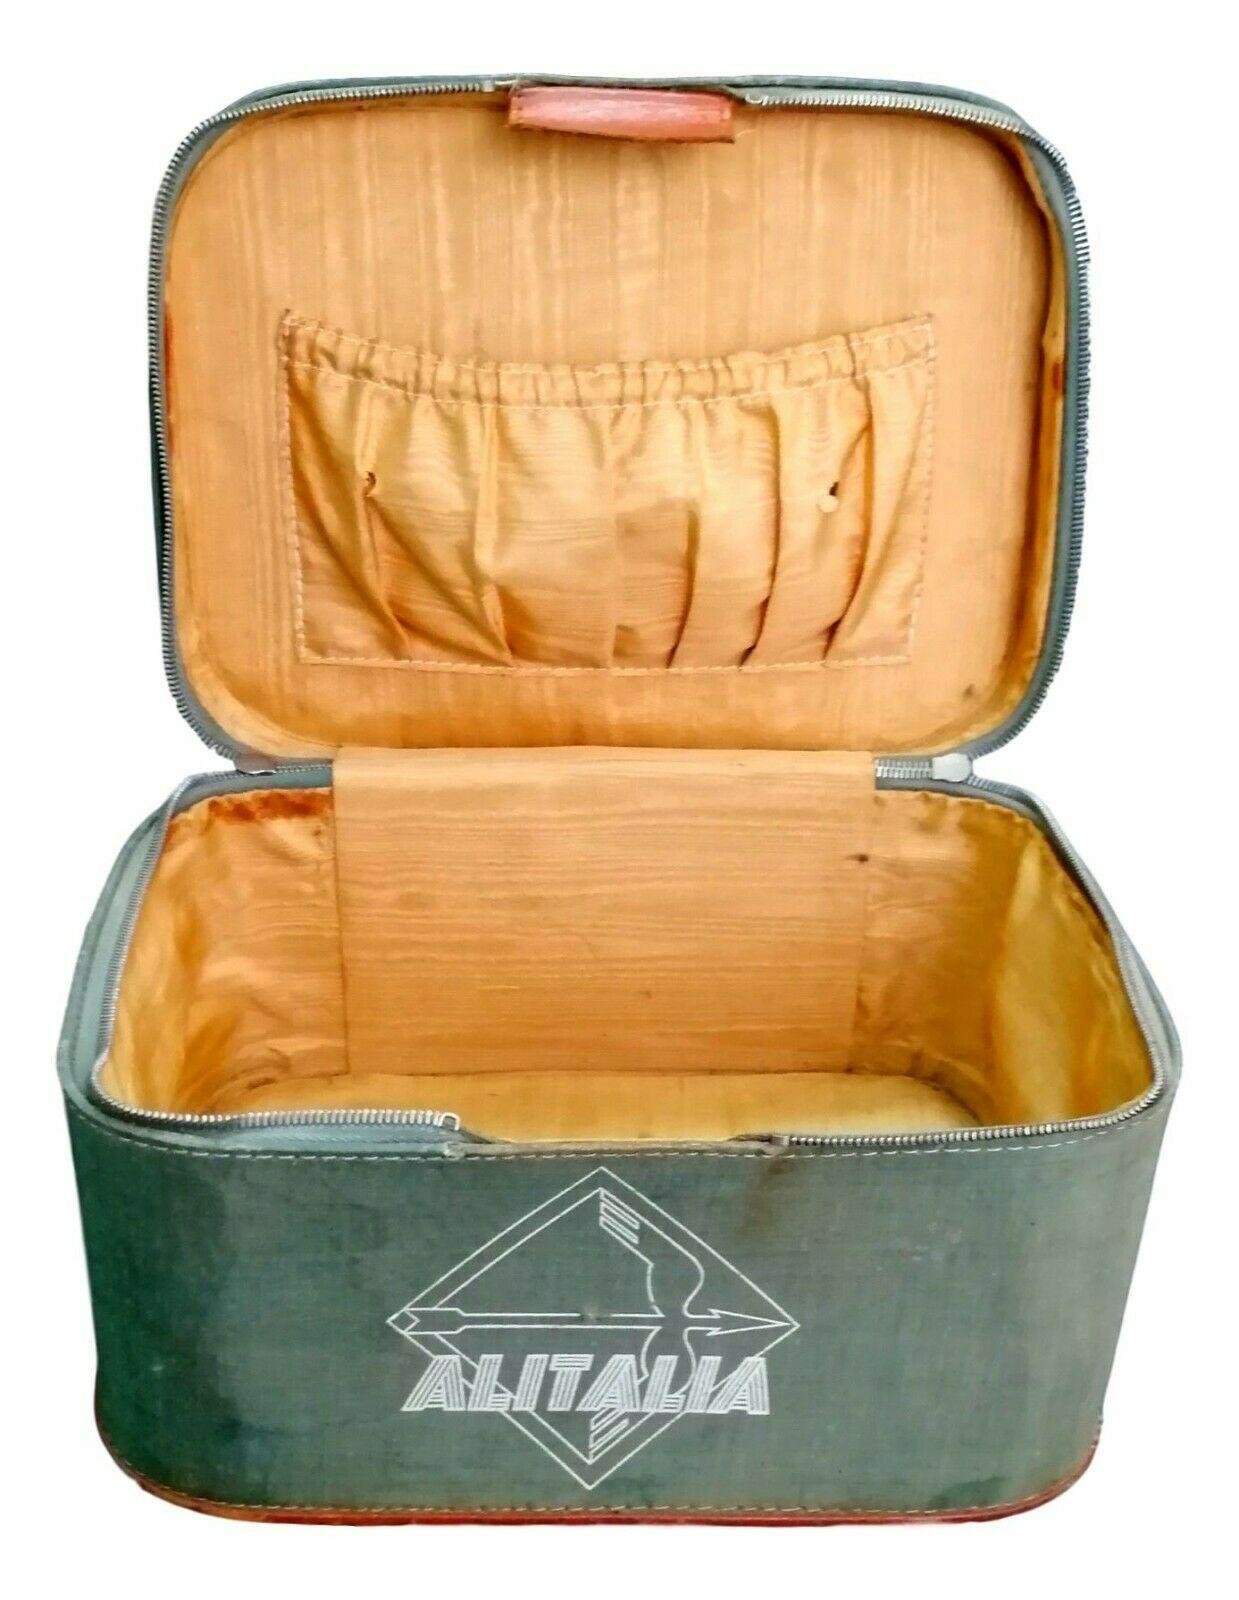 Very rare 50s Alitalia trunk, intended exclusively for flight personnel, the hostess

It measures 30 cm wide by 22 cm deep, 18 cm high

Vintage condition, as shown in the photos, with zip still working and original of the time, for a unique